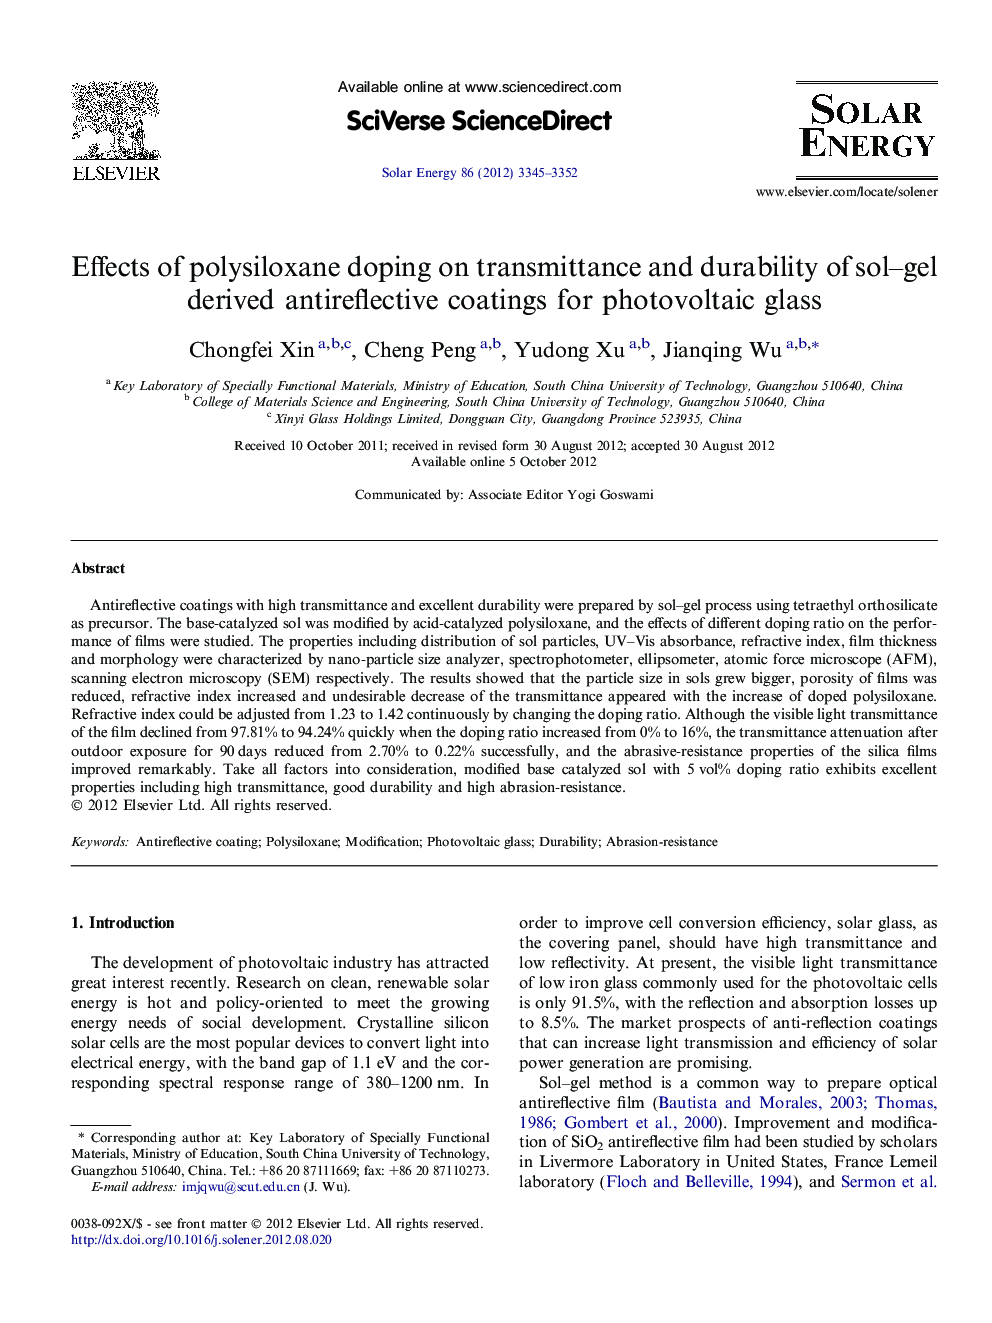 Effects of polysiloxane doping on transmittance and durability of sol–gel derived antireflective coatings for photovoltaic glass